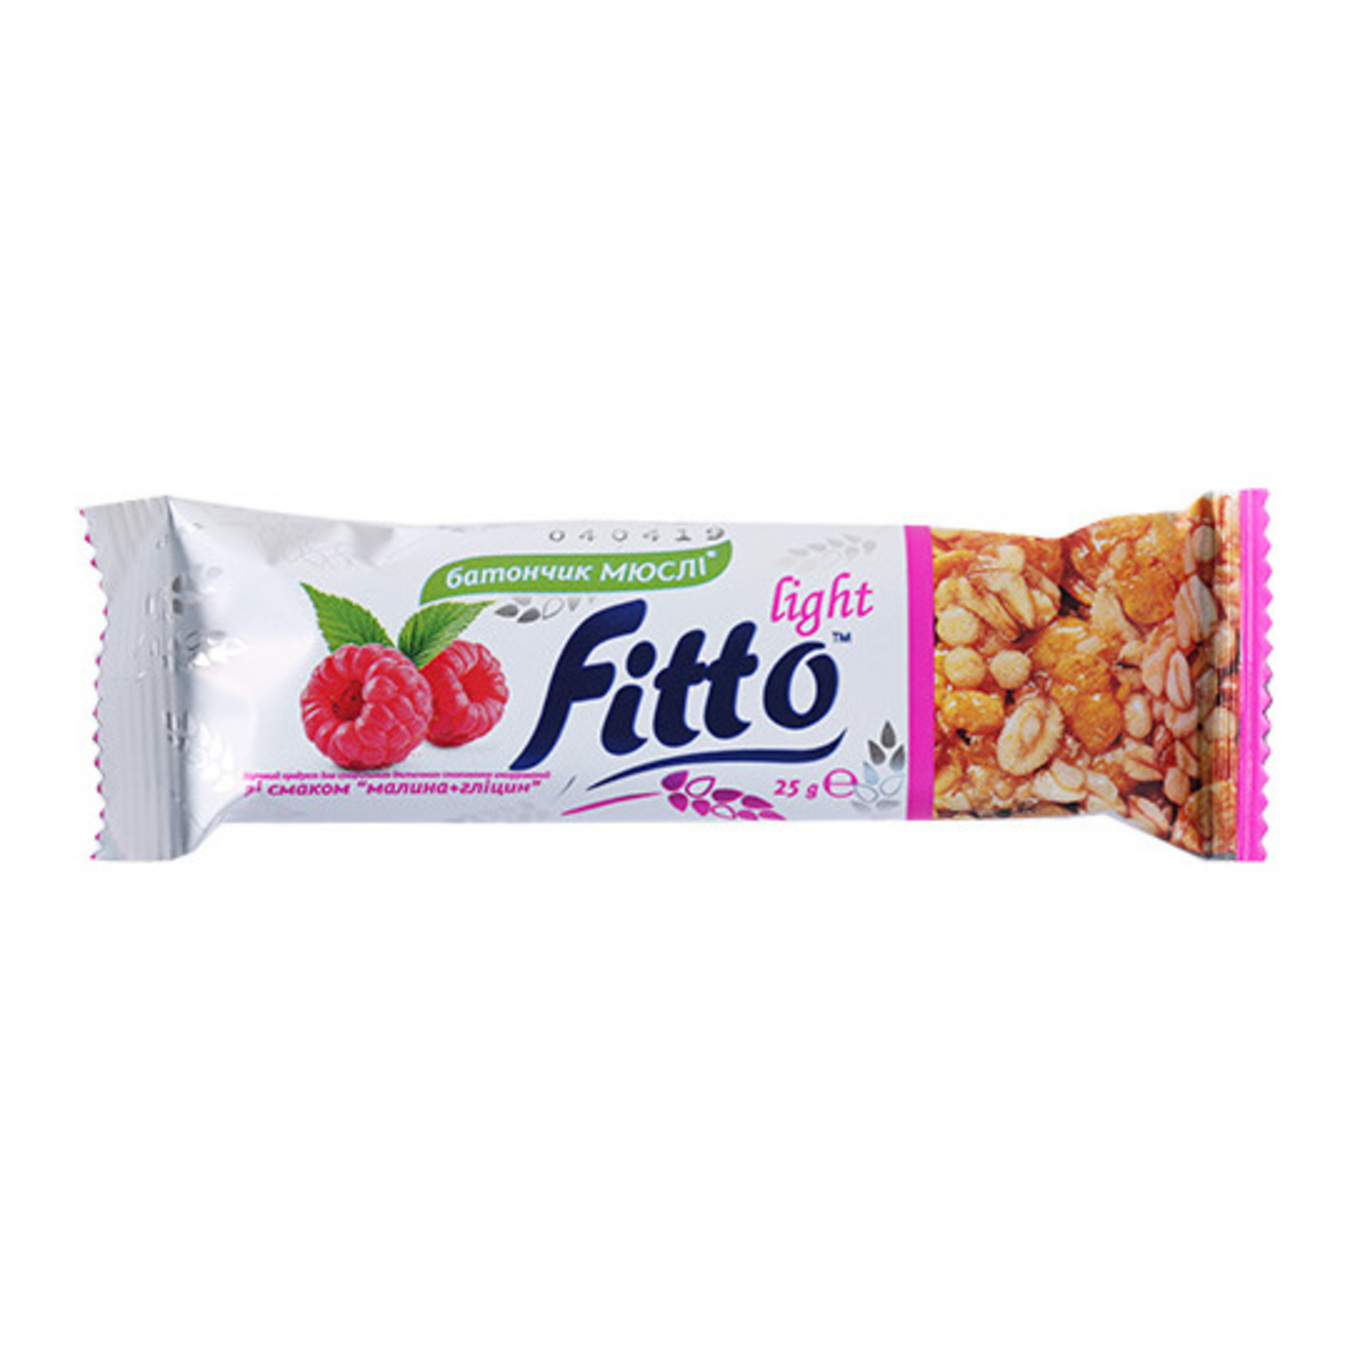 Muesli candy bar Fitto Light With Raspberry And Glycine Taste 25g